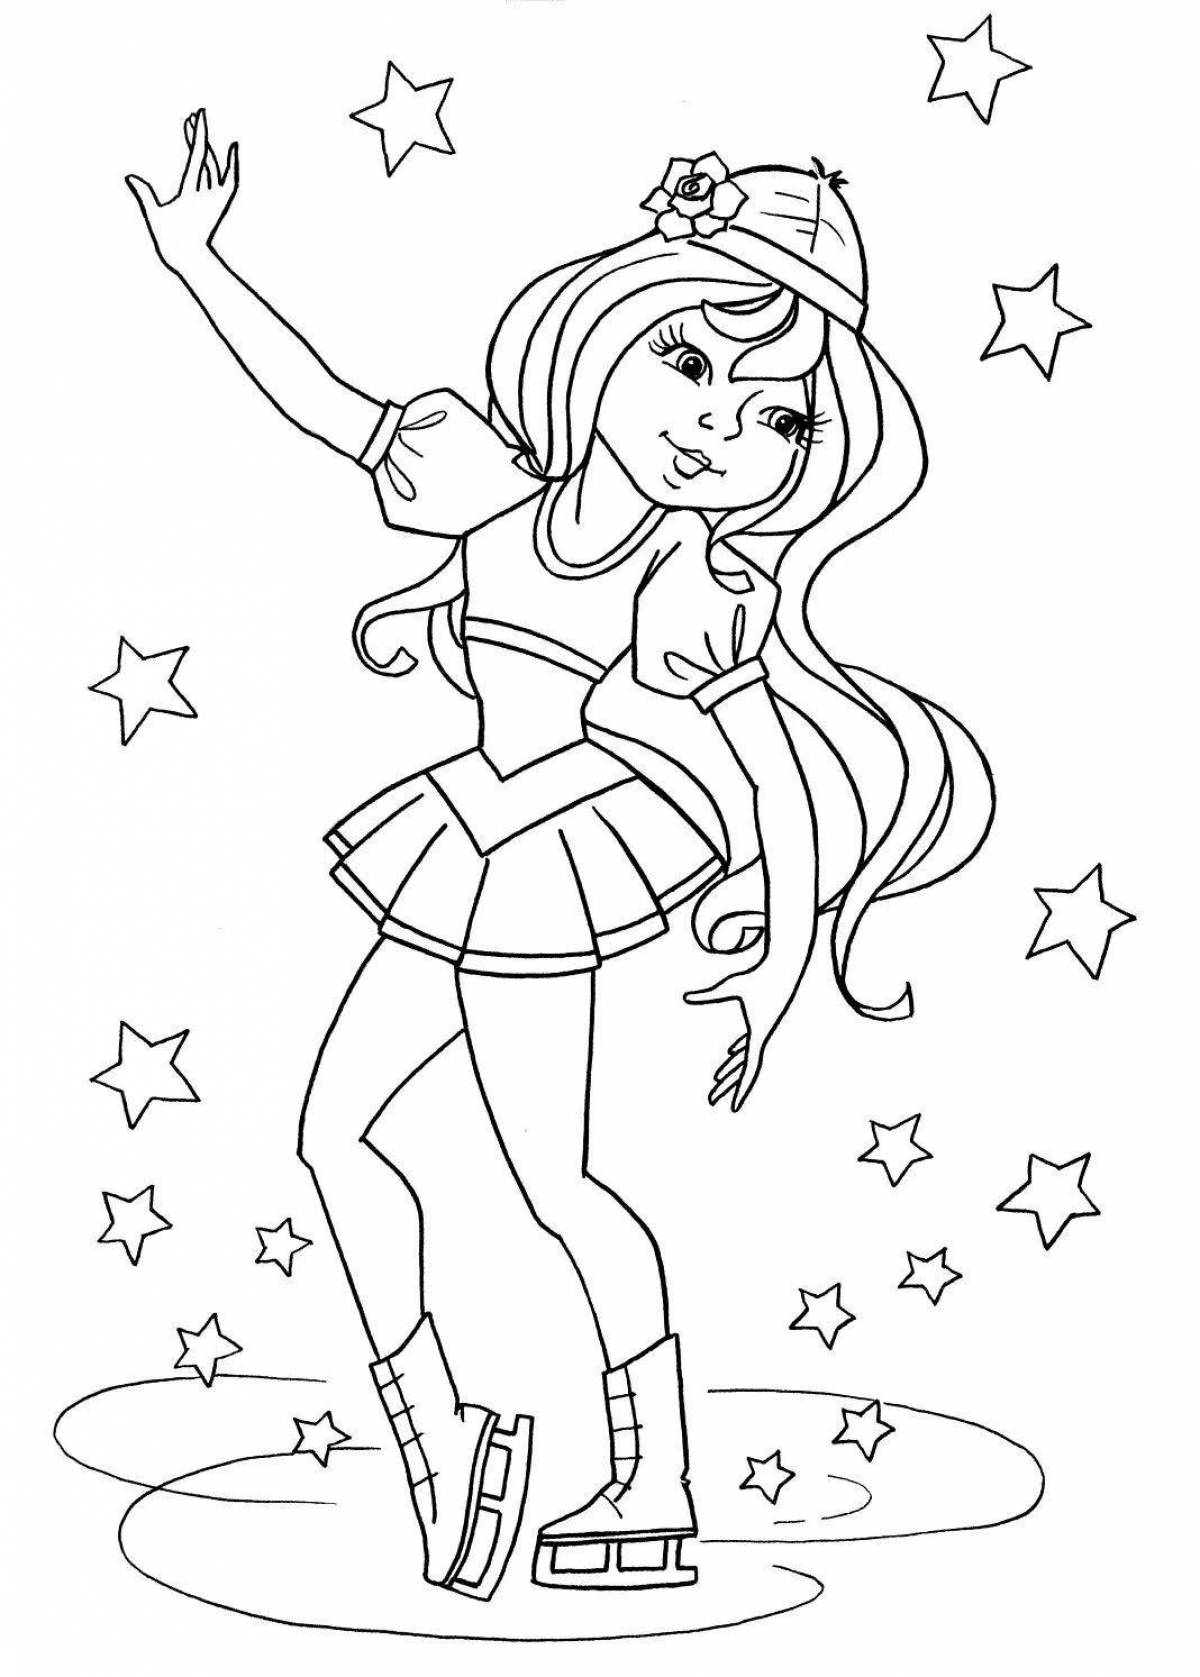 Sweet skater coloring pages for kids